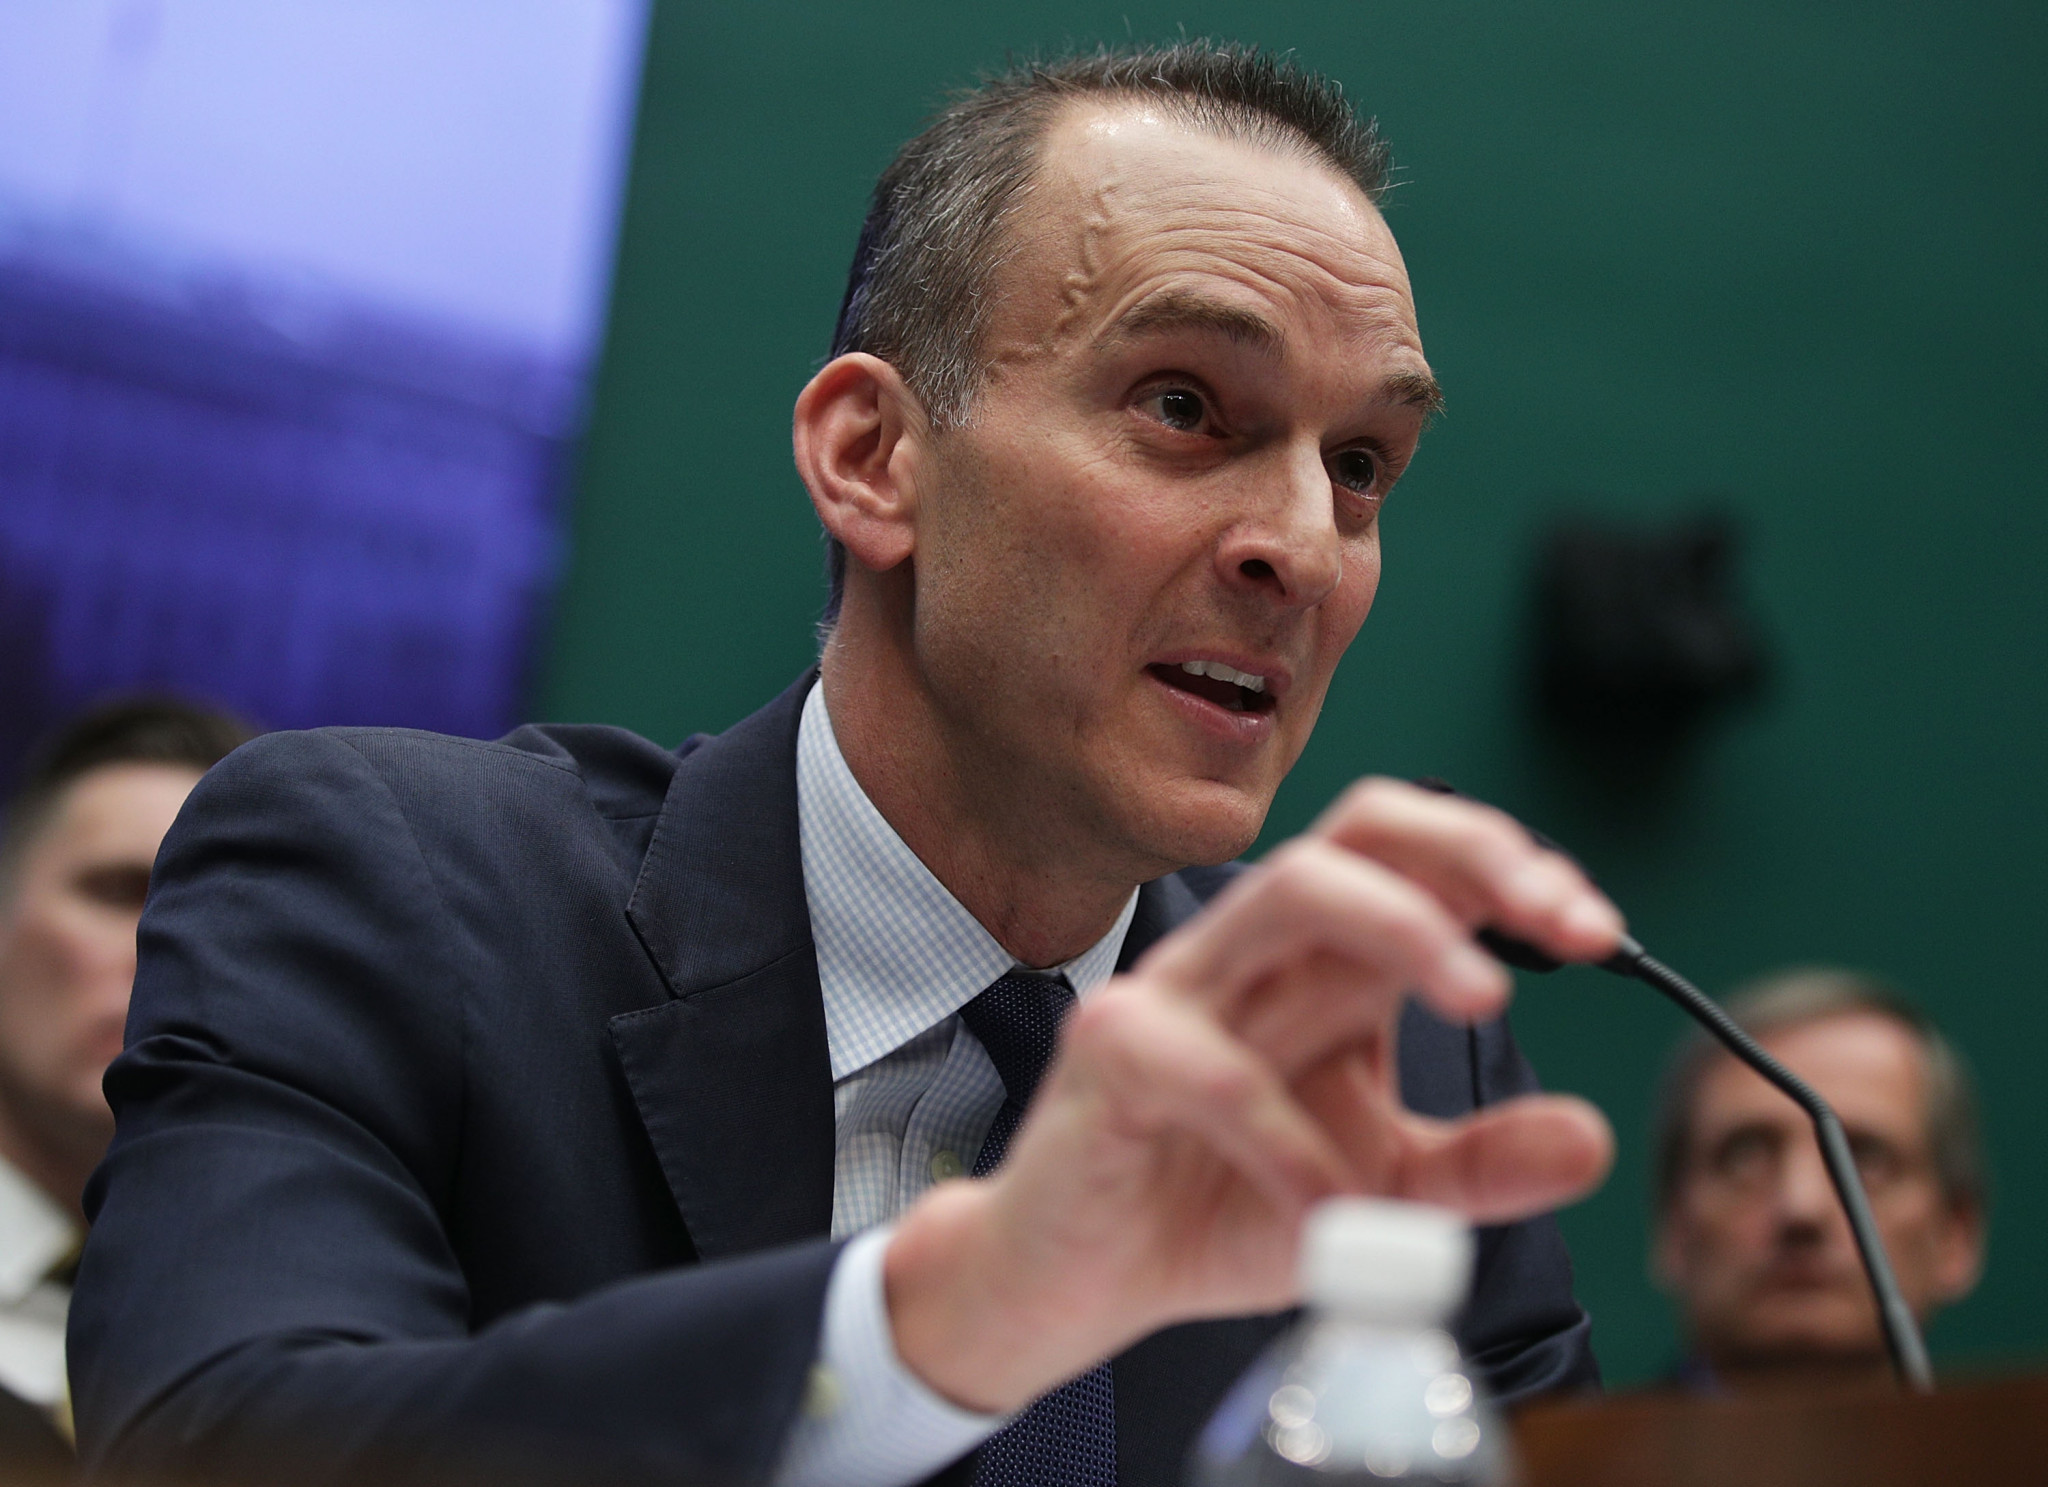 USADA chief executive Travis Tygart has reacted angrily to the WADA announcement ©Getty Images